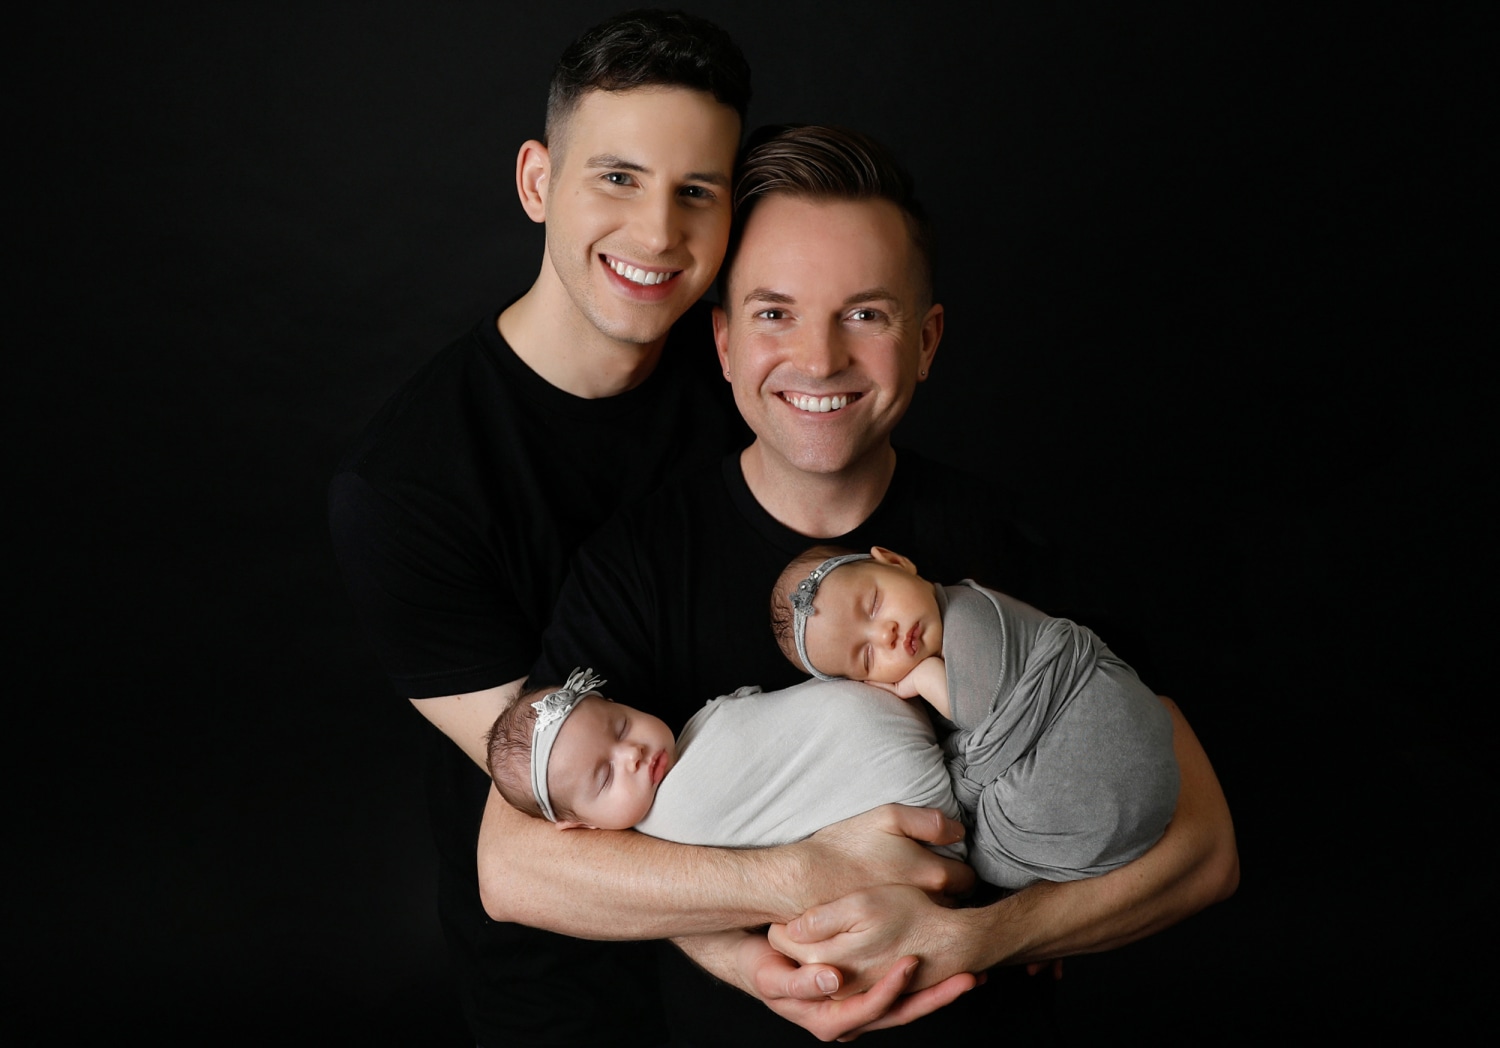 For gay parents, first comes the baby